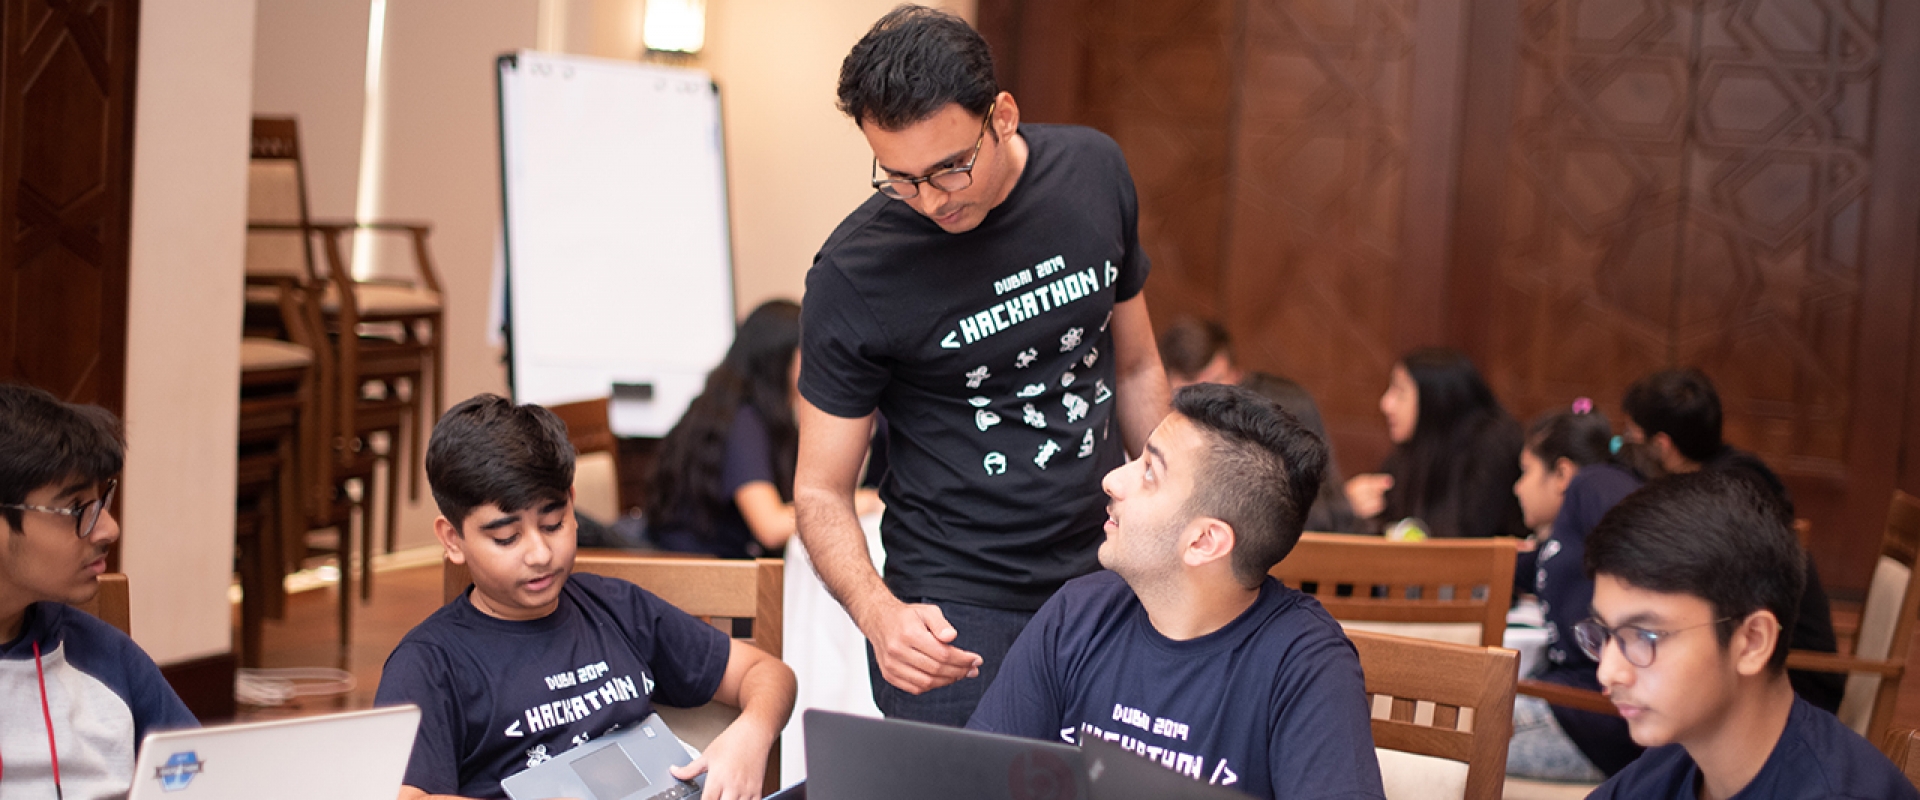 A Hackathon Dubai participant consults with a facilitator to determine if his group is on the right track.